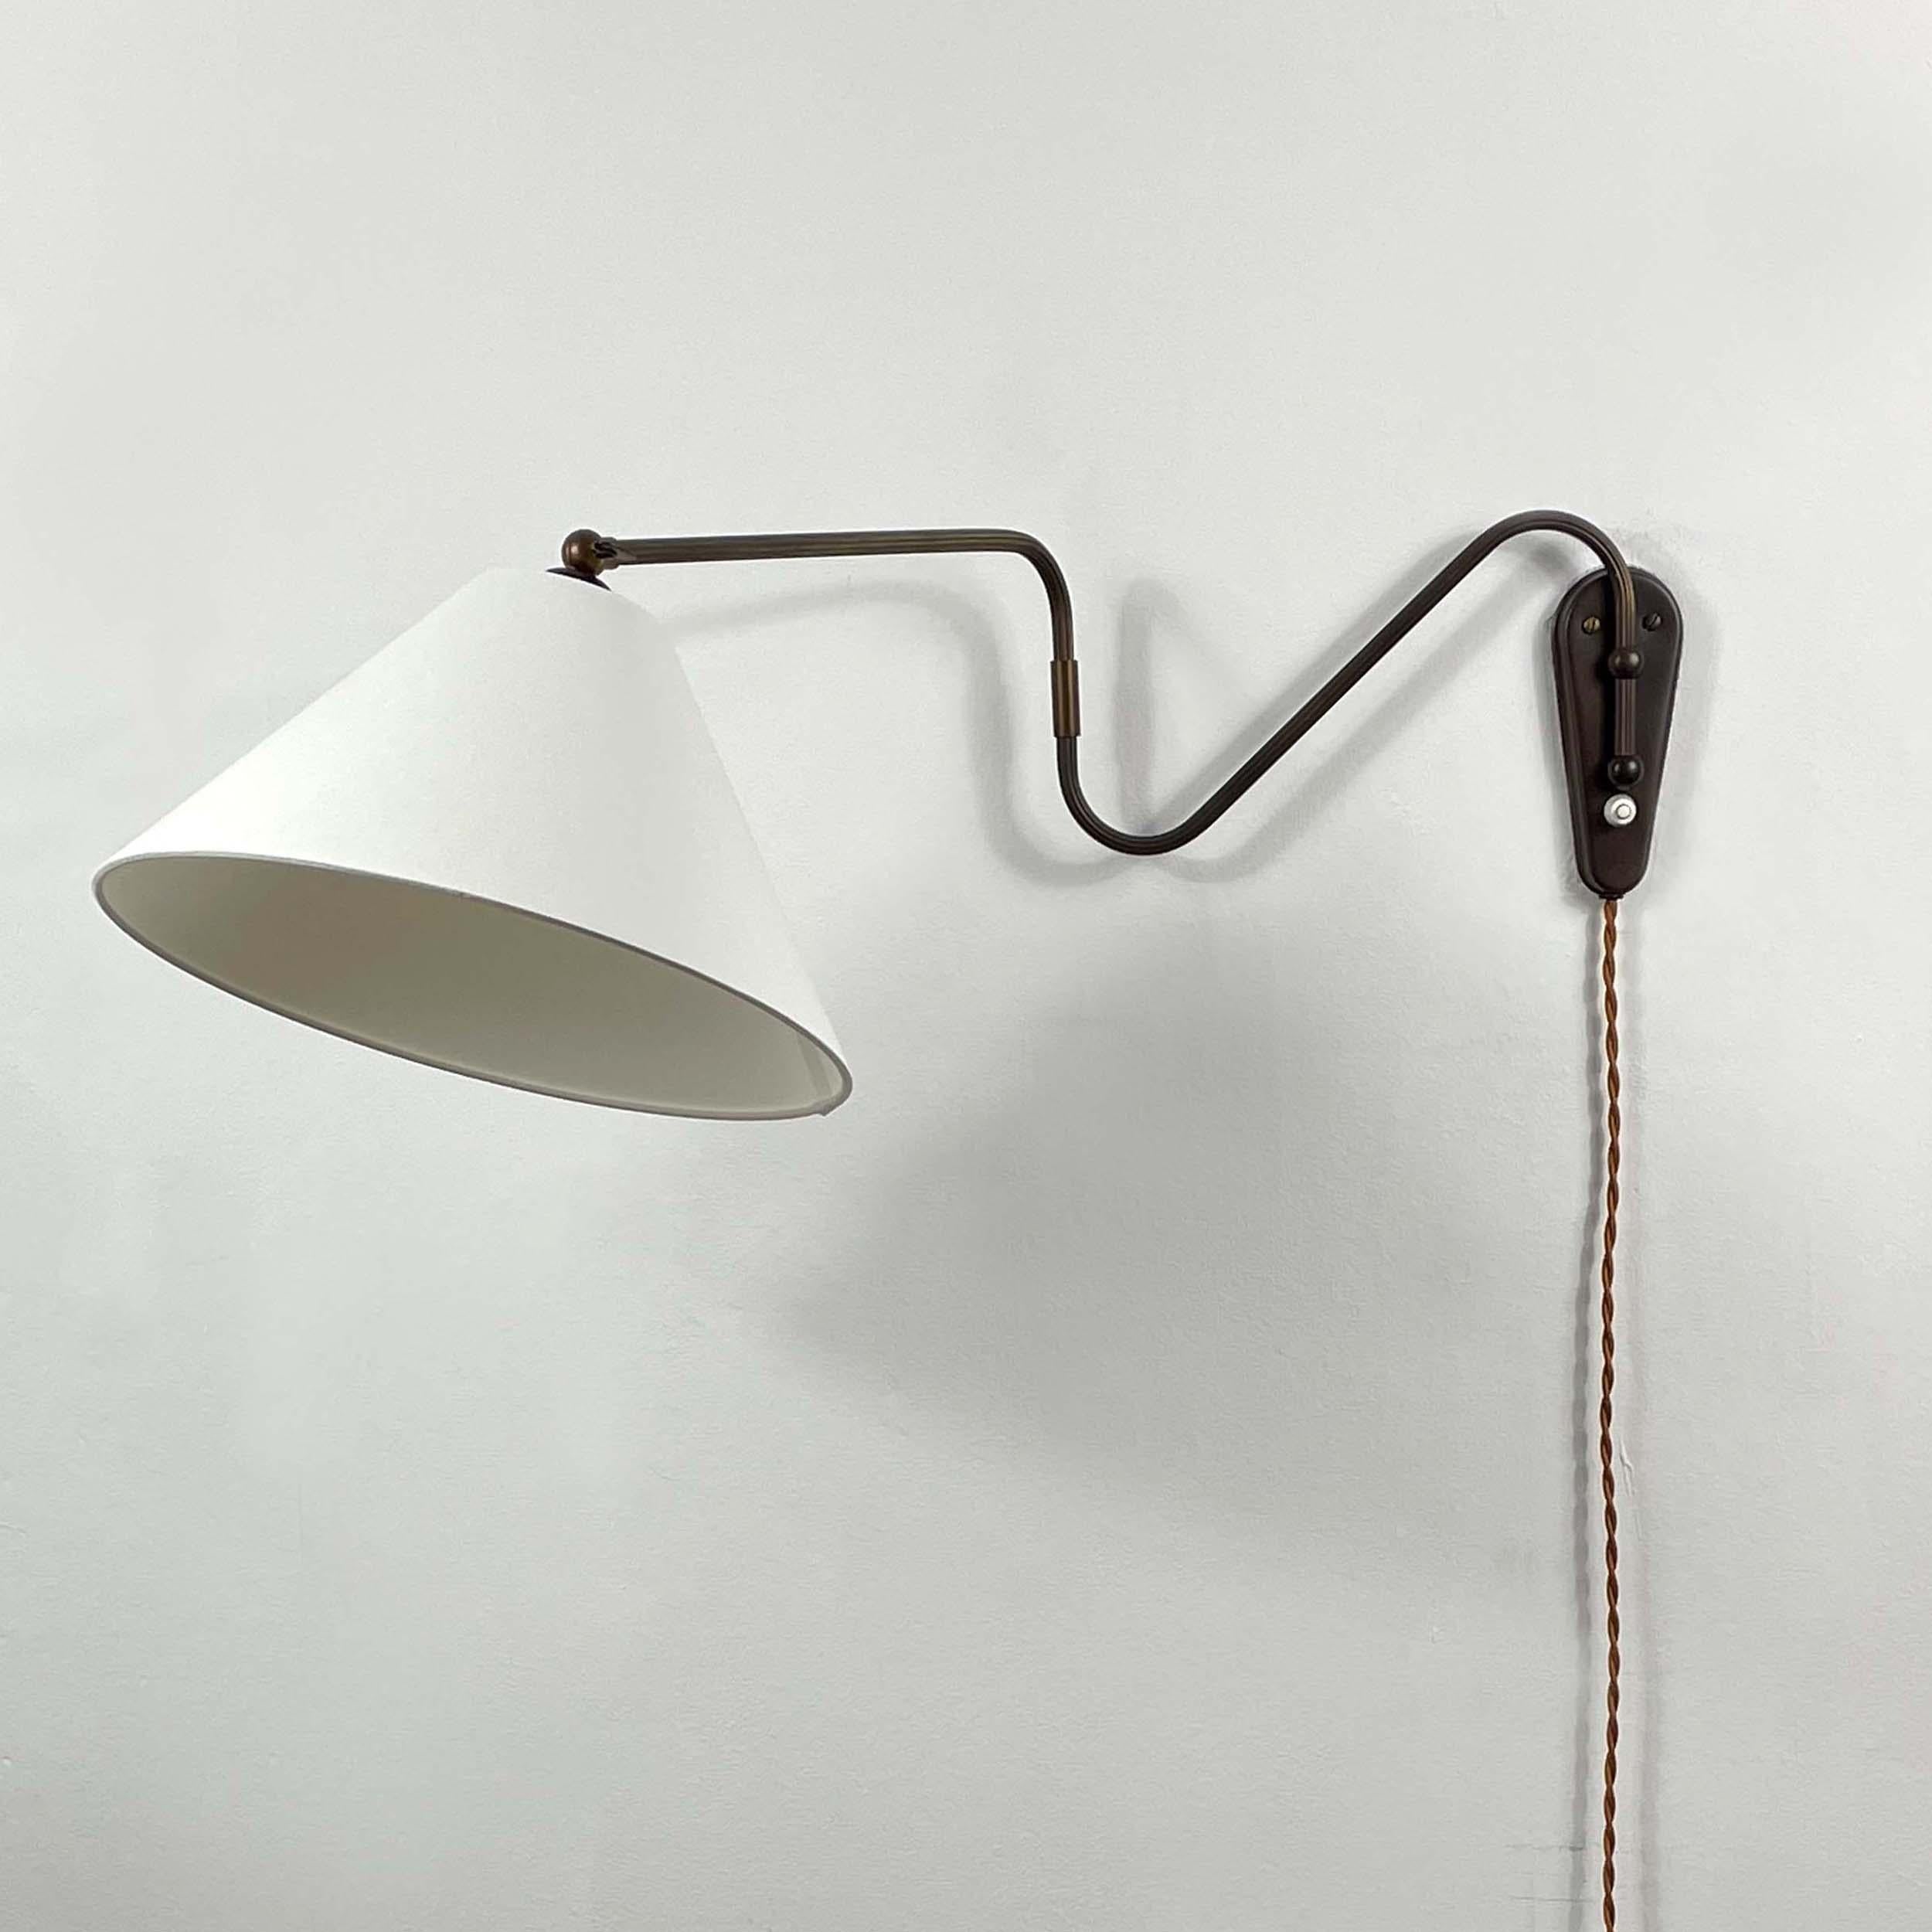 This unusual 1950s adjustable and articulating vintage wall light was designed and manufactured in Sweden.

The lamp features an off-white fabric lampshade and bronzed brass articulating lamp arm with brass details. The lamp has been rewired with